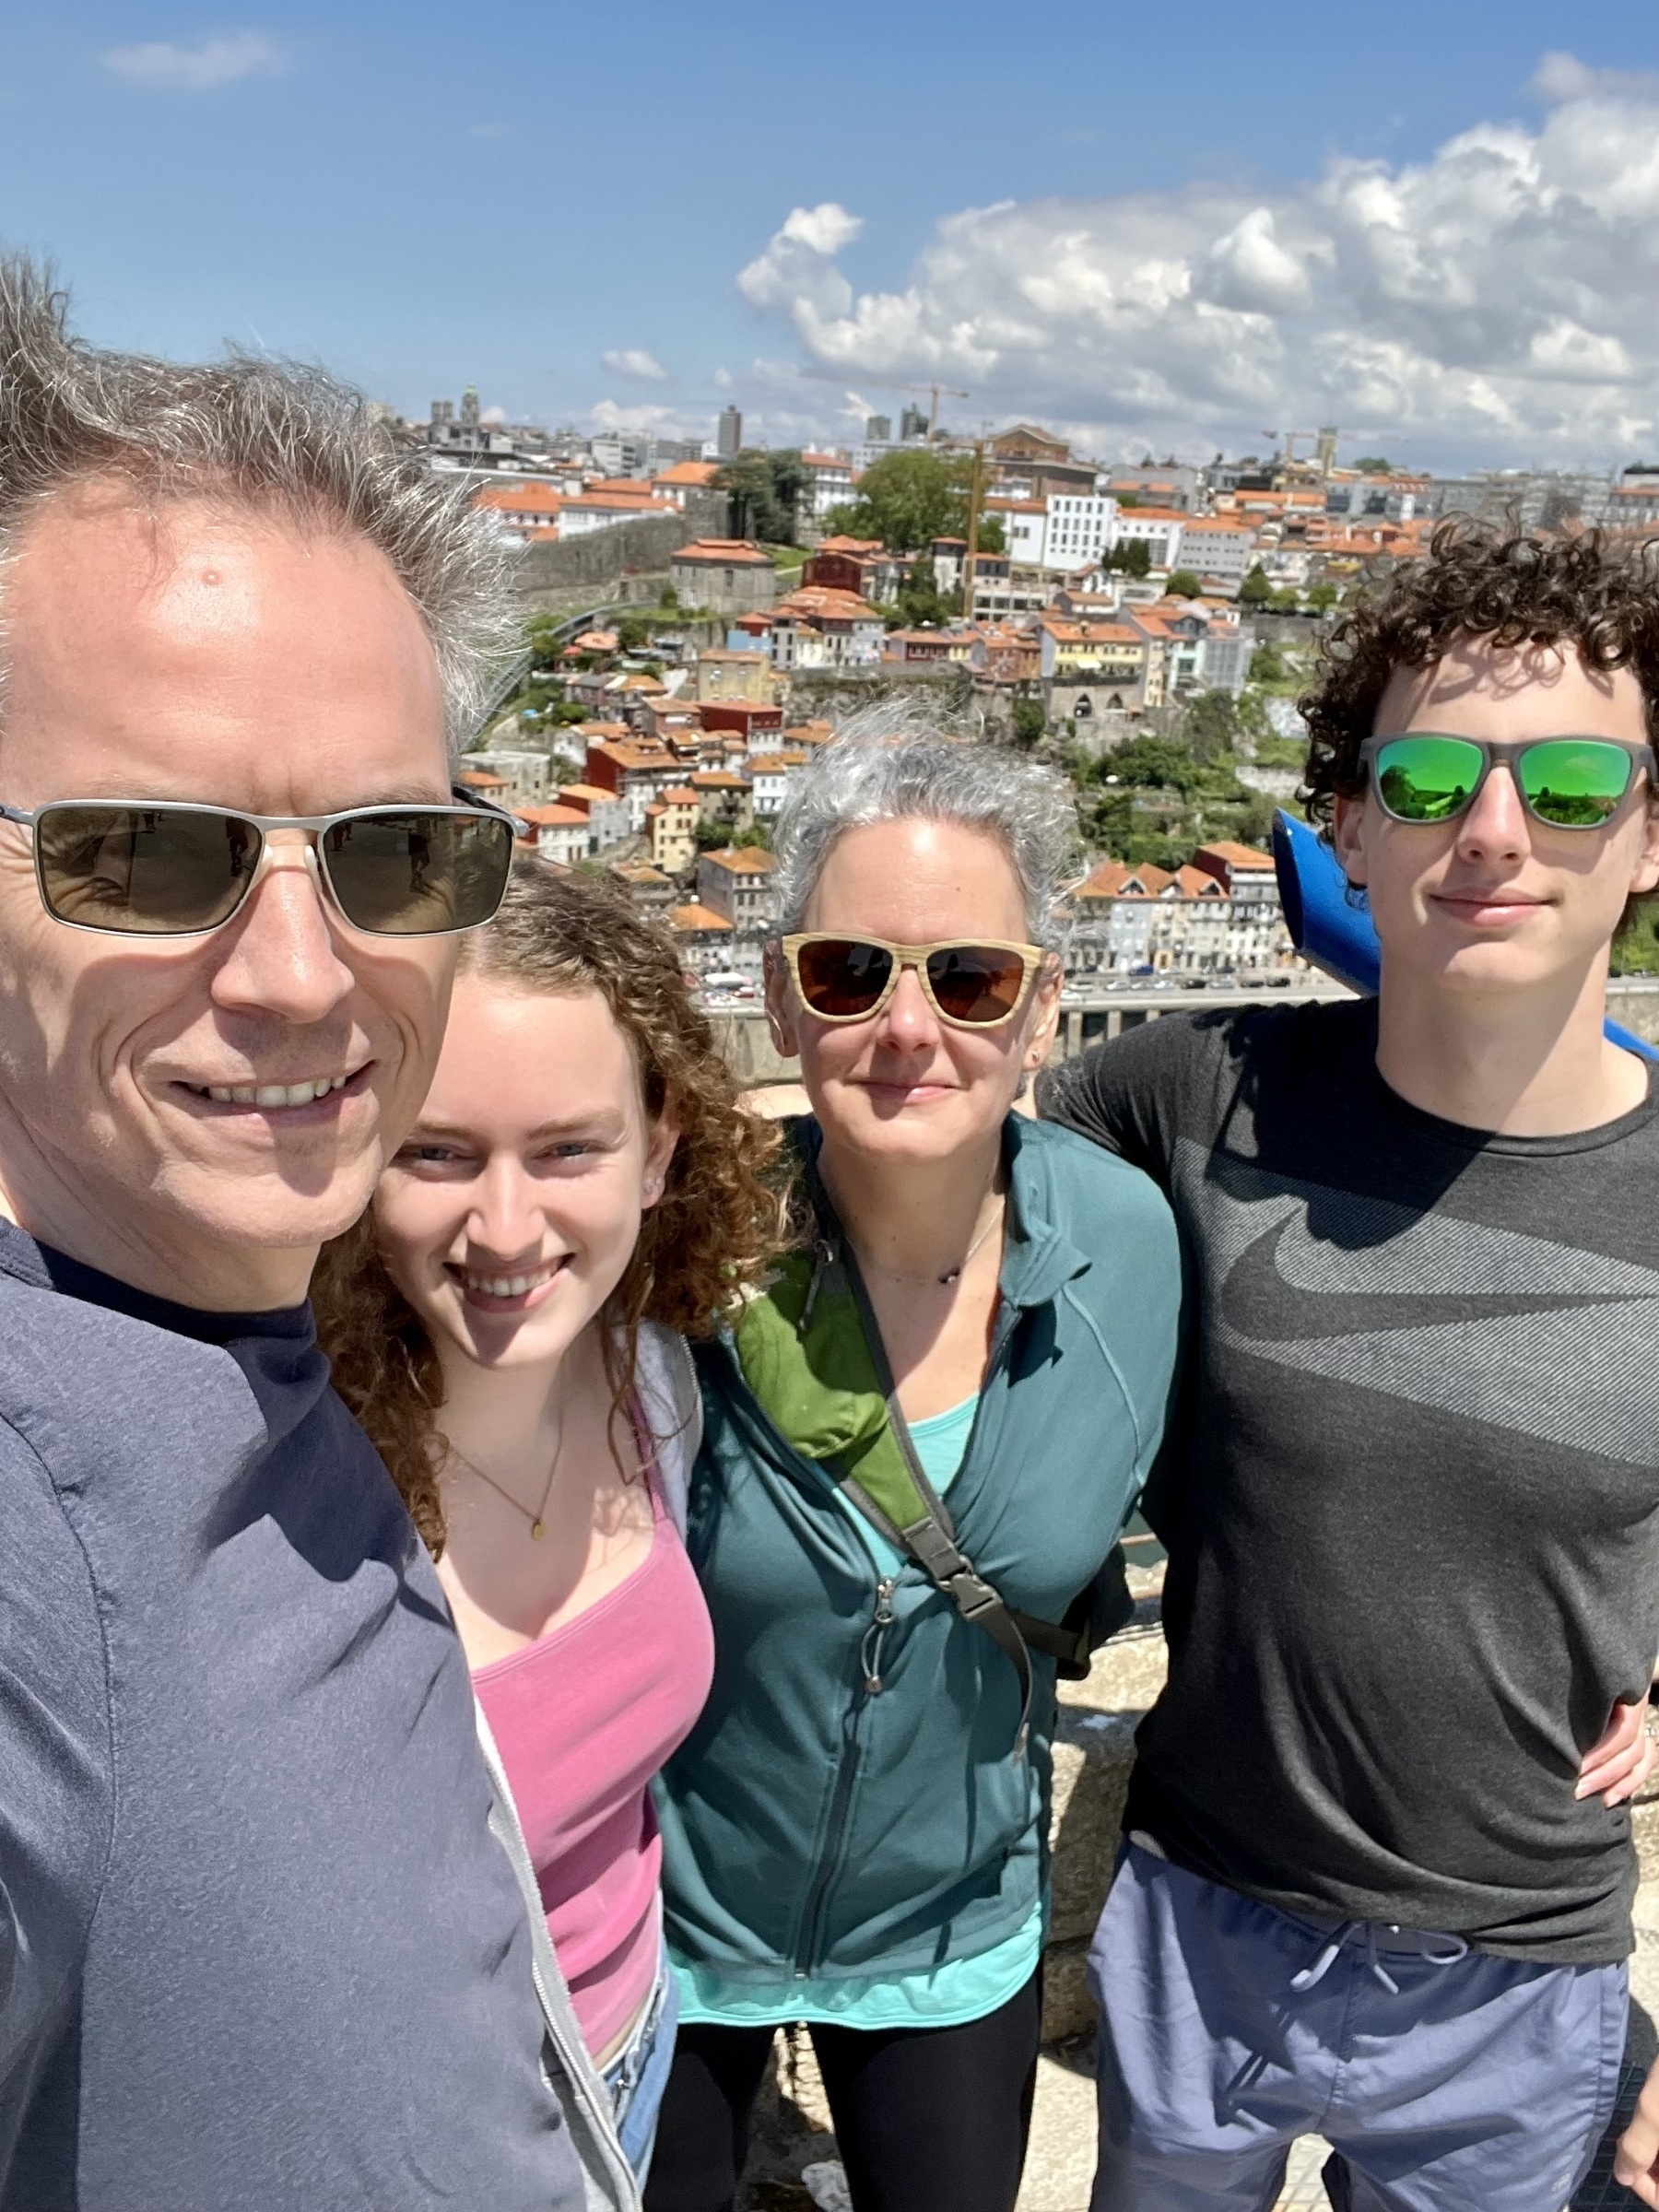 Four people are posing for a selfie with a scenic city backdrop under a cloudy sky. They are smiling and wearing casual attire with sunglasses.